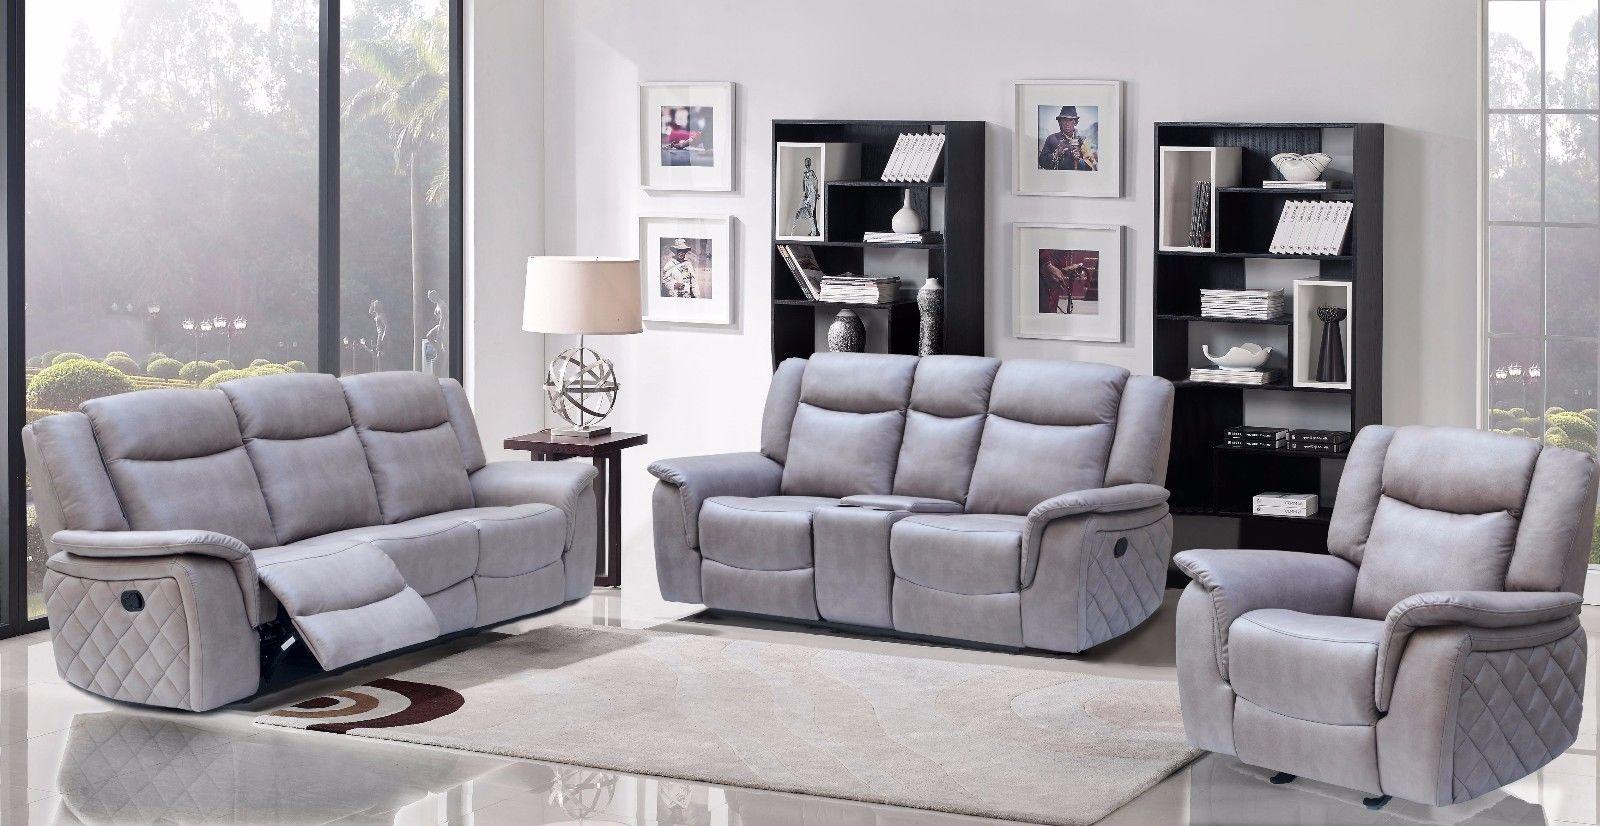 

    
Meridian 628 Carly Living Room Set 3pcs in Grey
